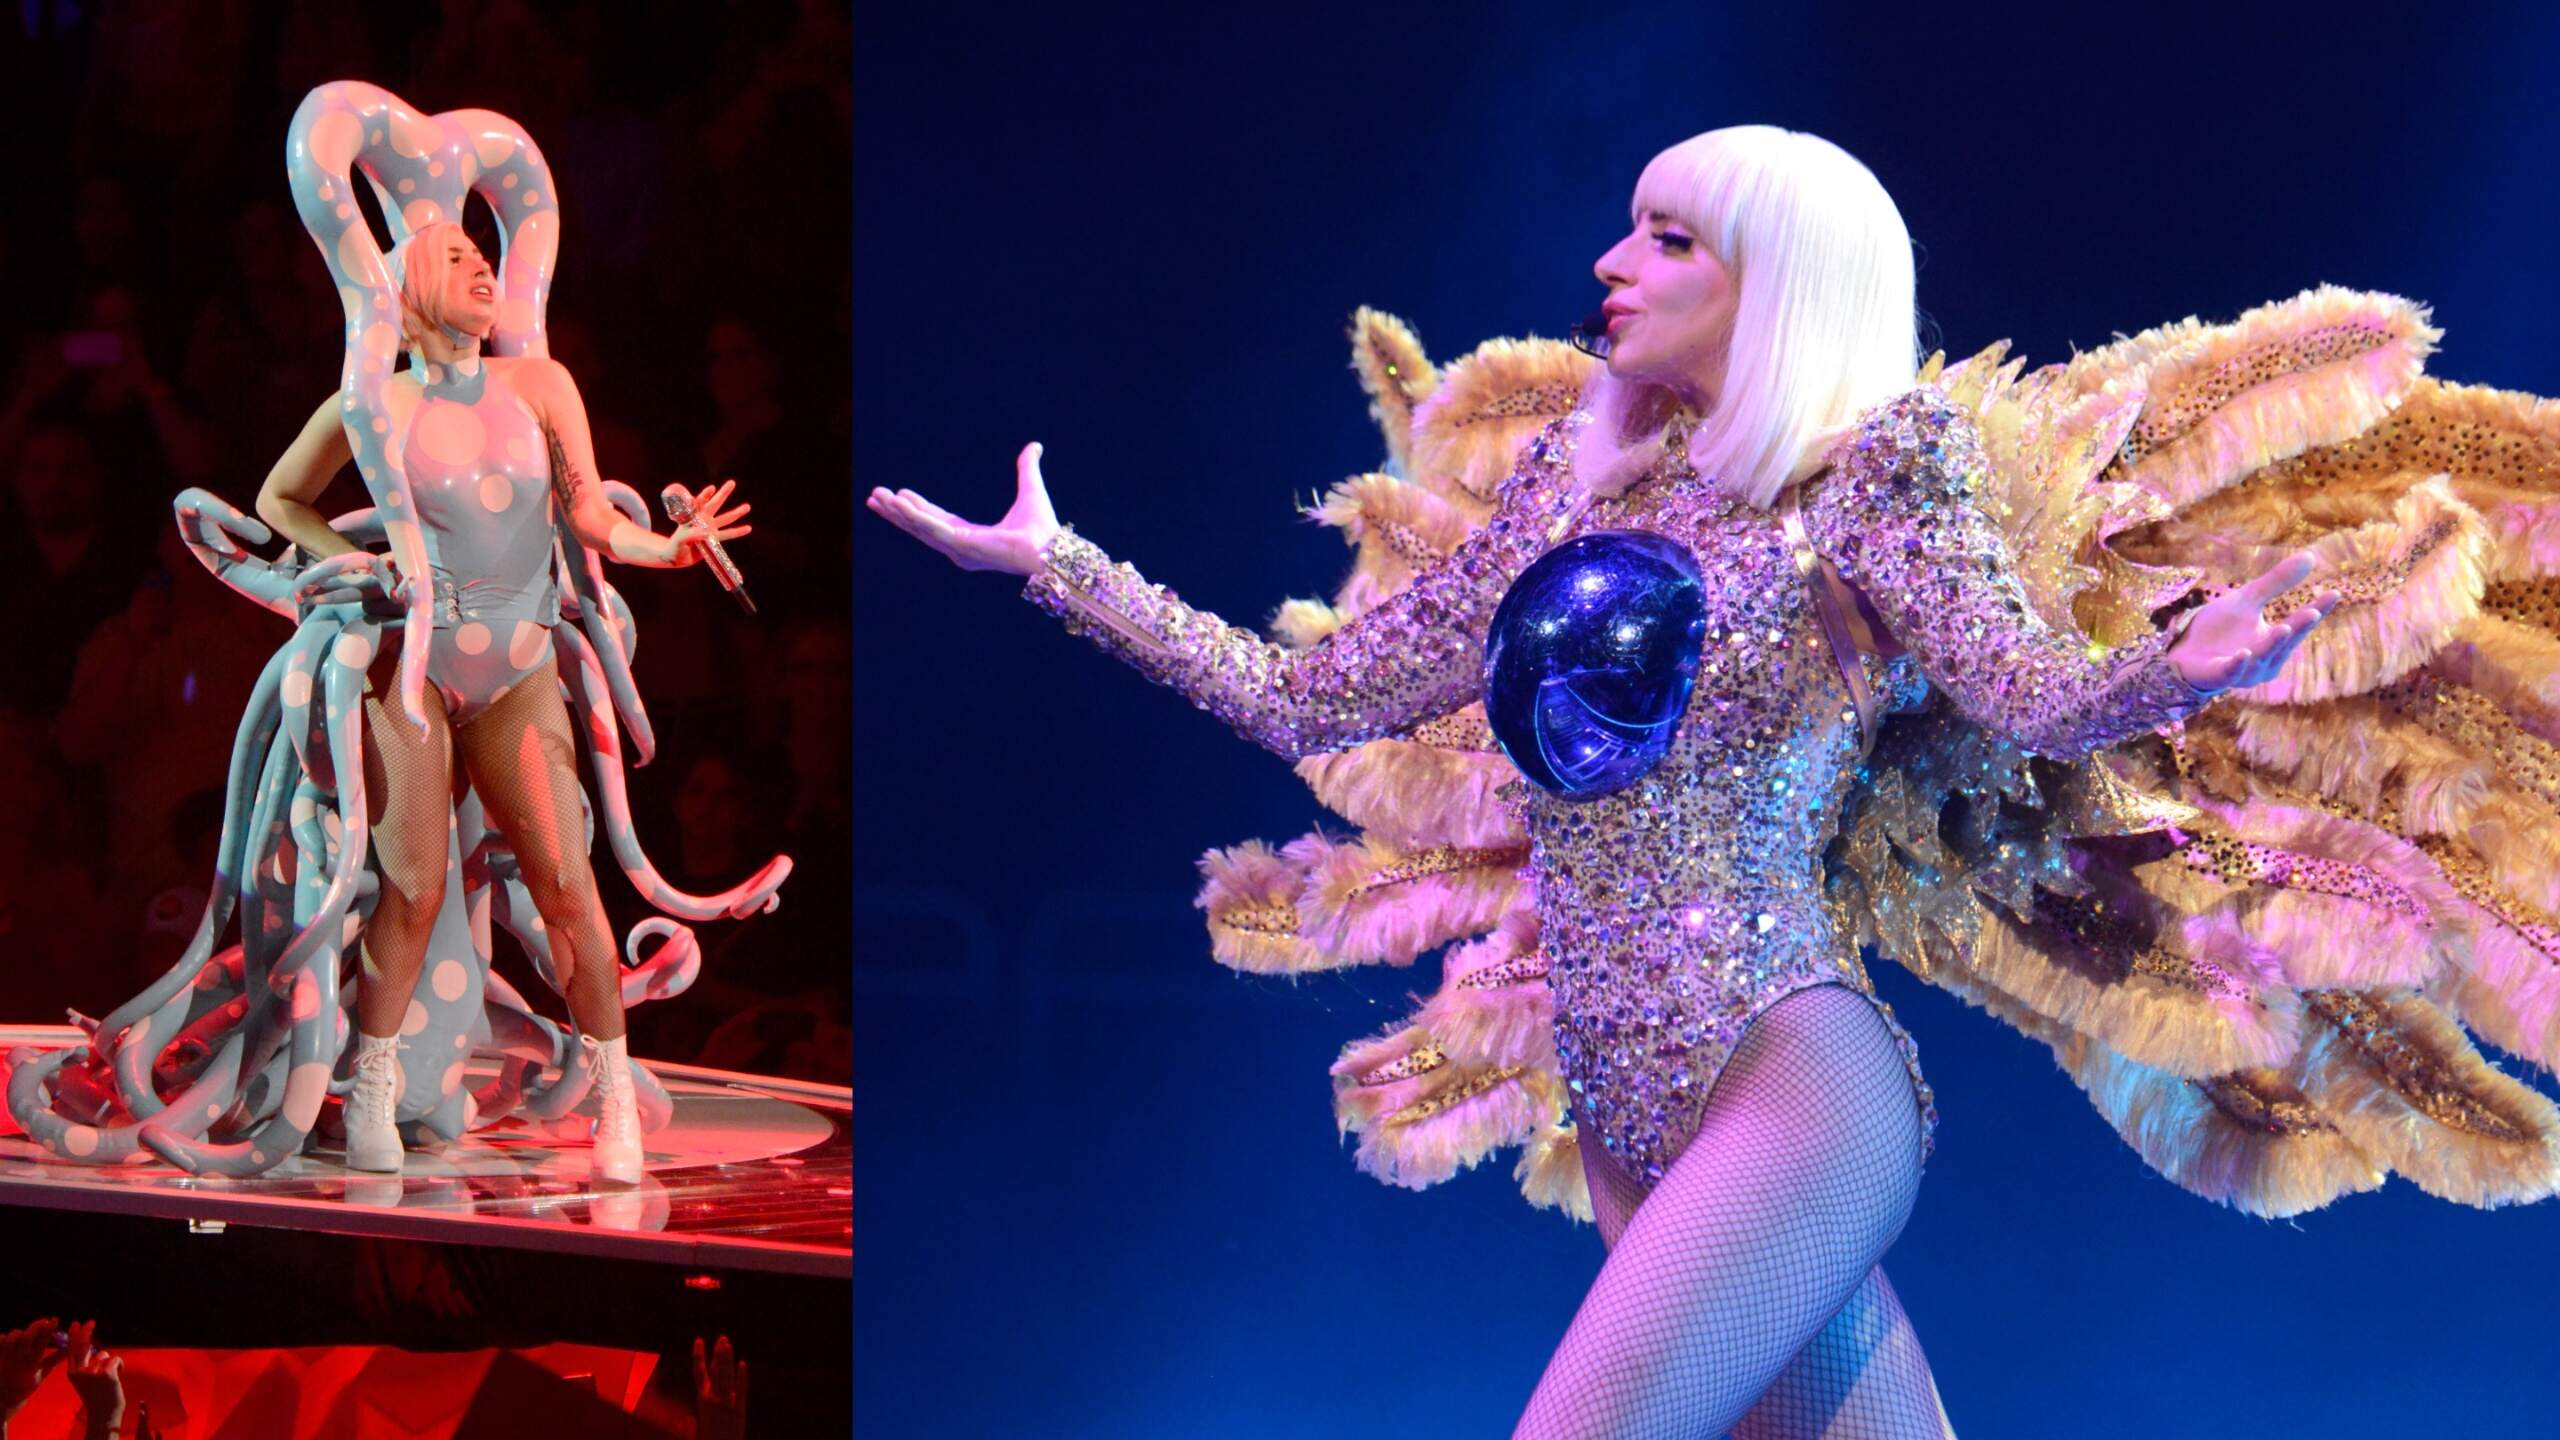 Singer Lady Gaga performs onstage during her artRave: The Artpop Ball wearing an octopus outfit and wings